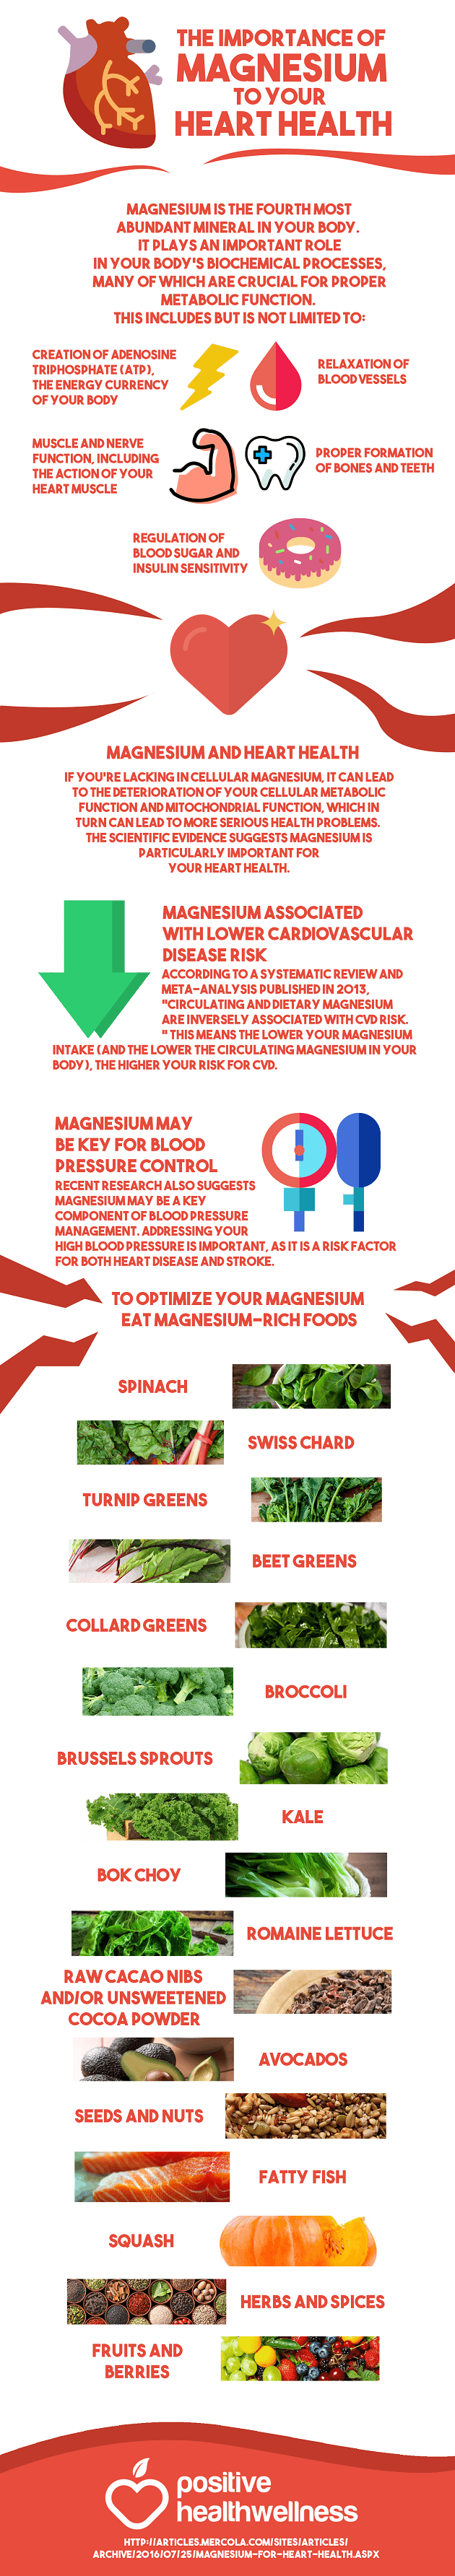 Magnesium For Heart Health [Infographic]